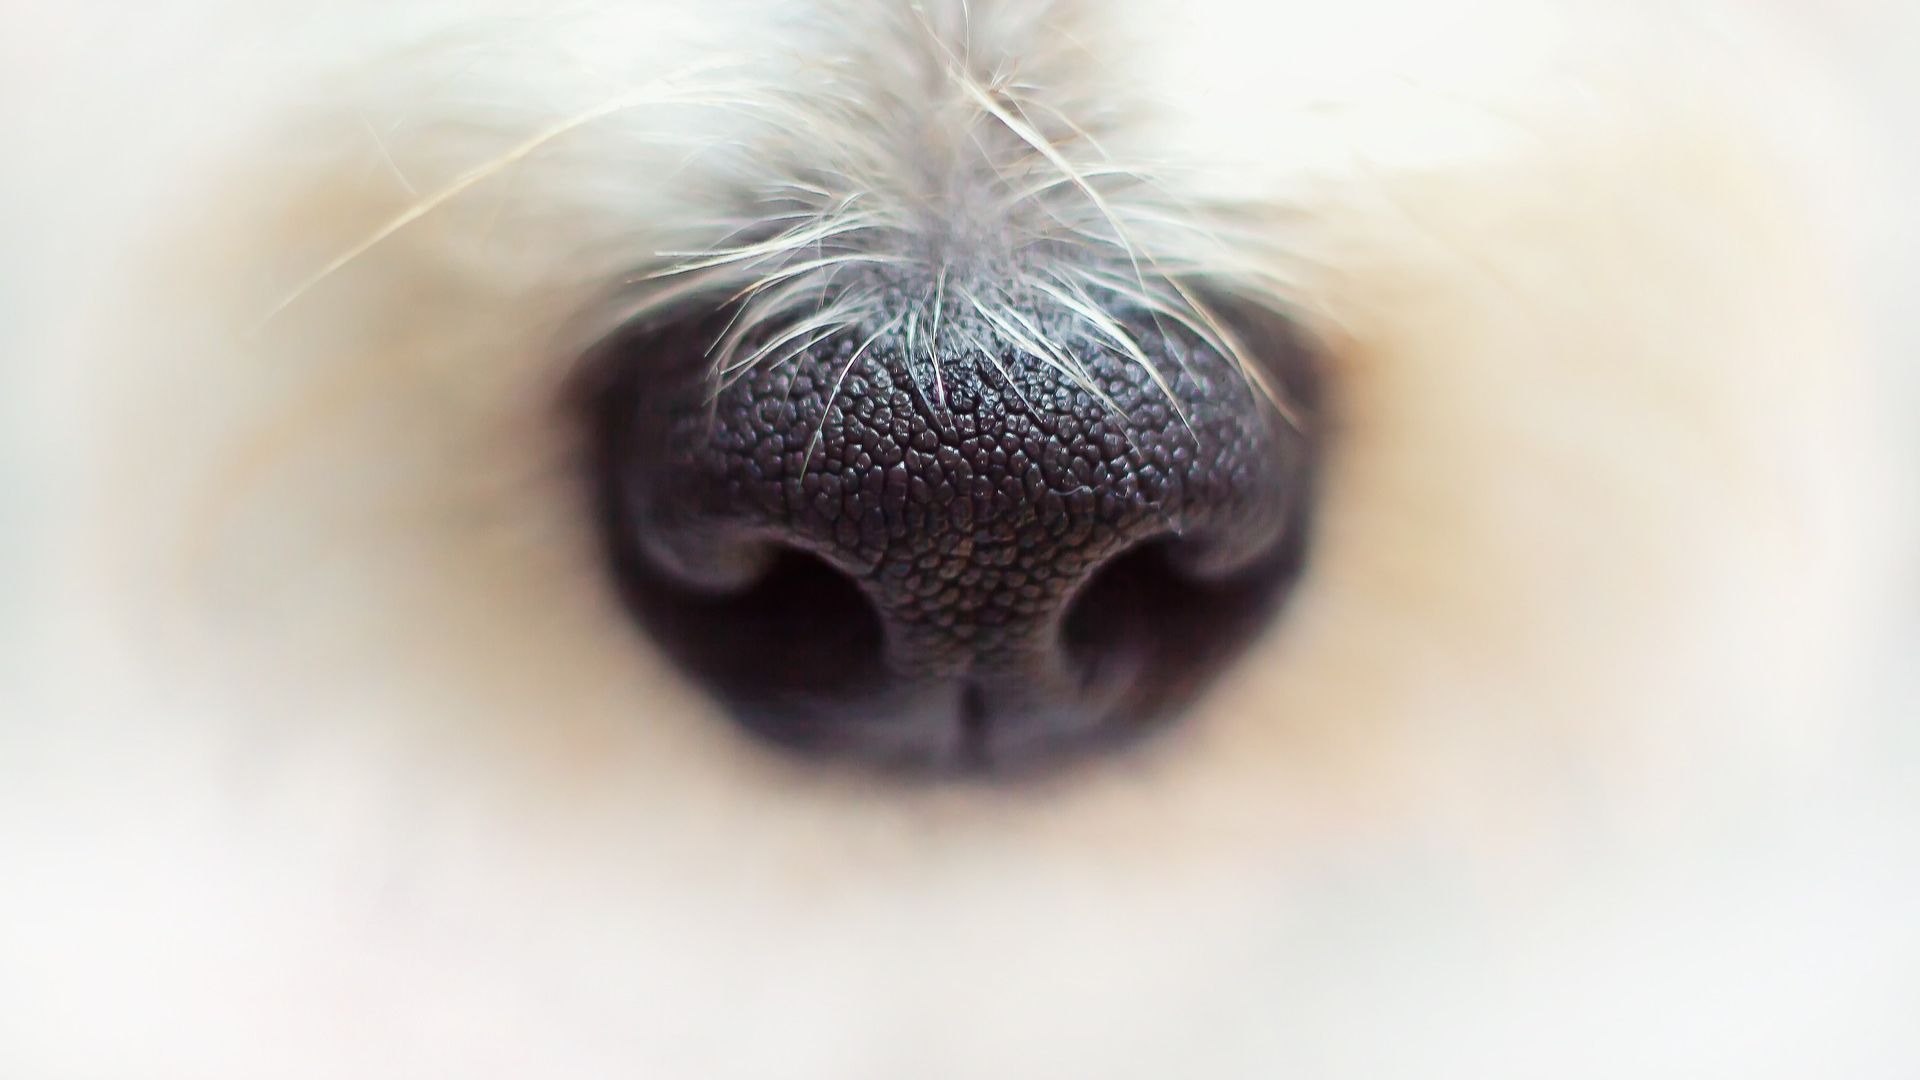 A dog nose magnified